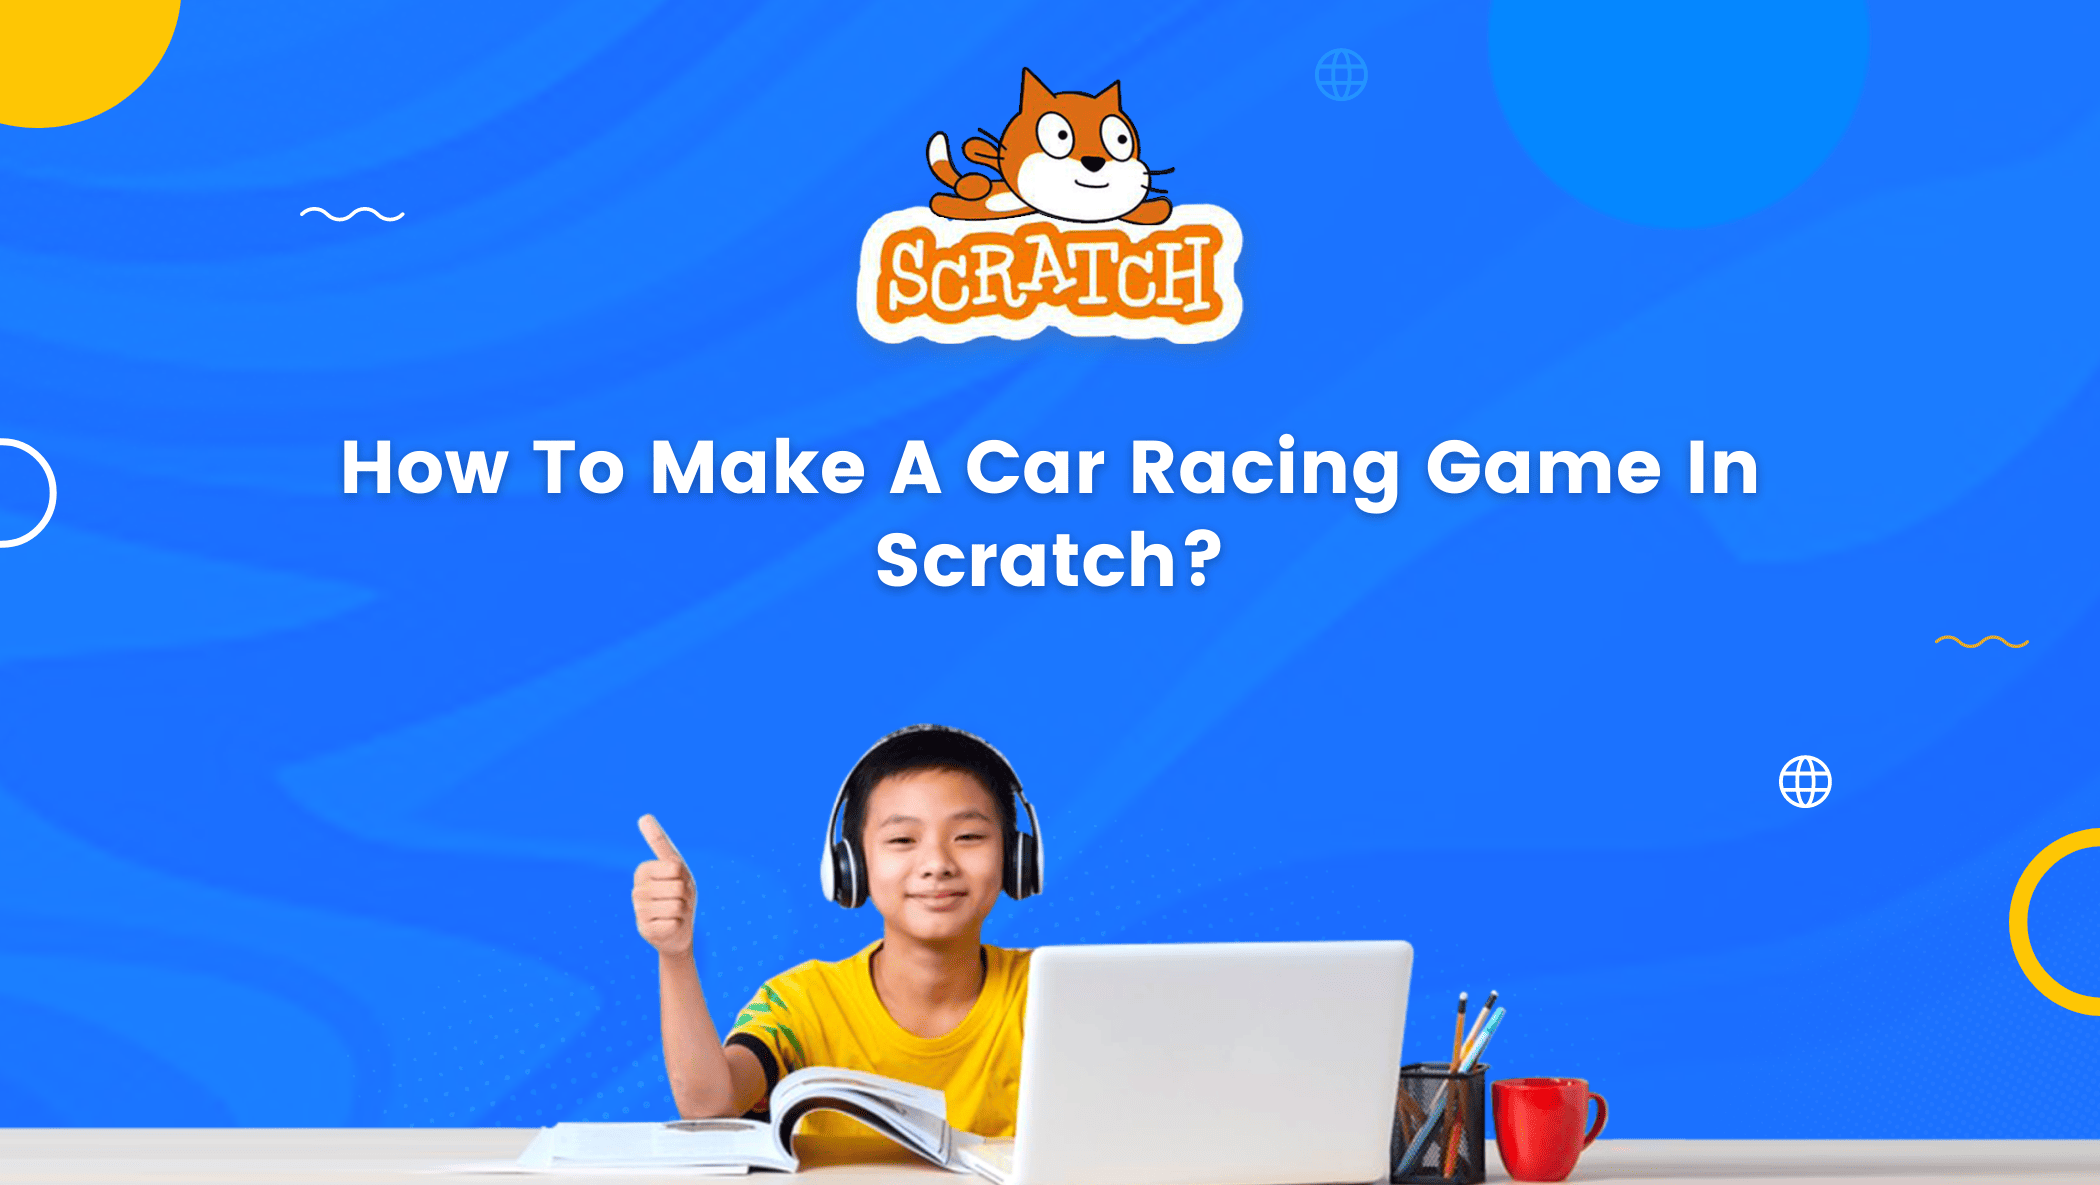 How To Make A Car Racing Game In Scratch